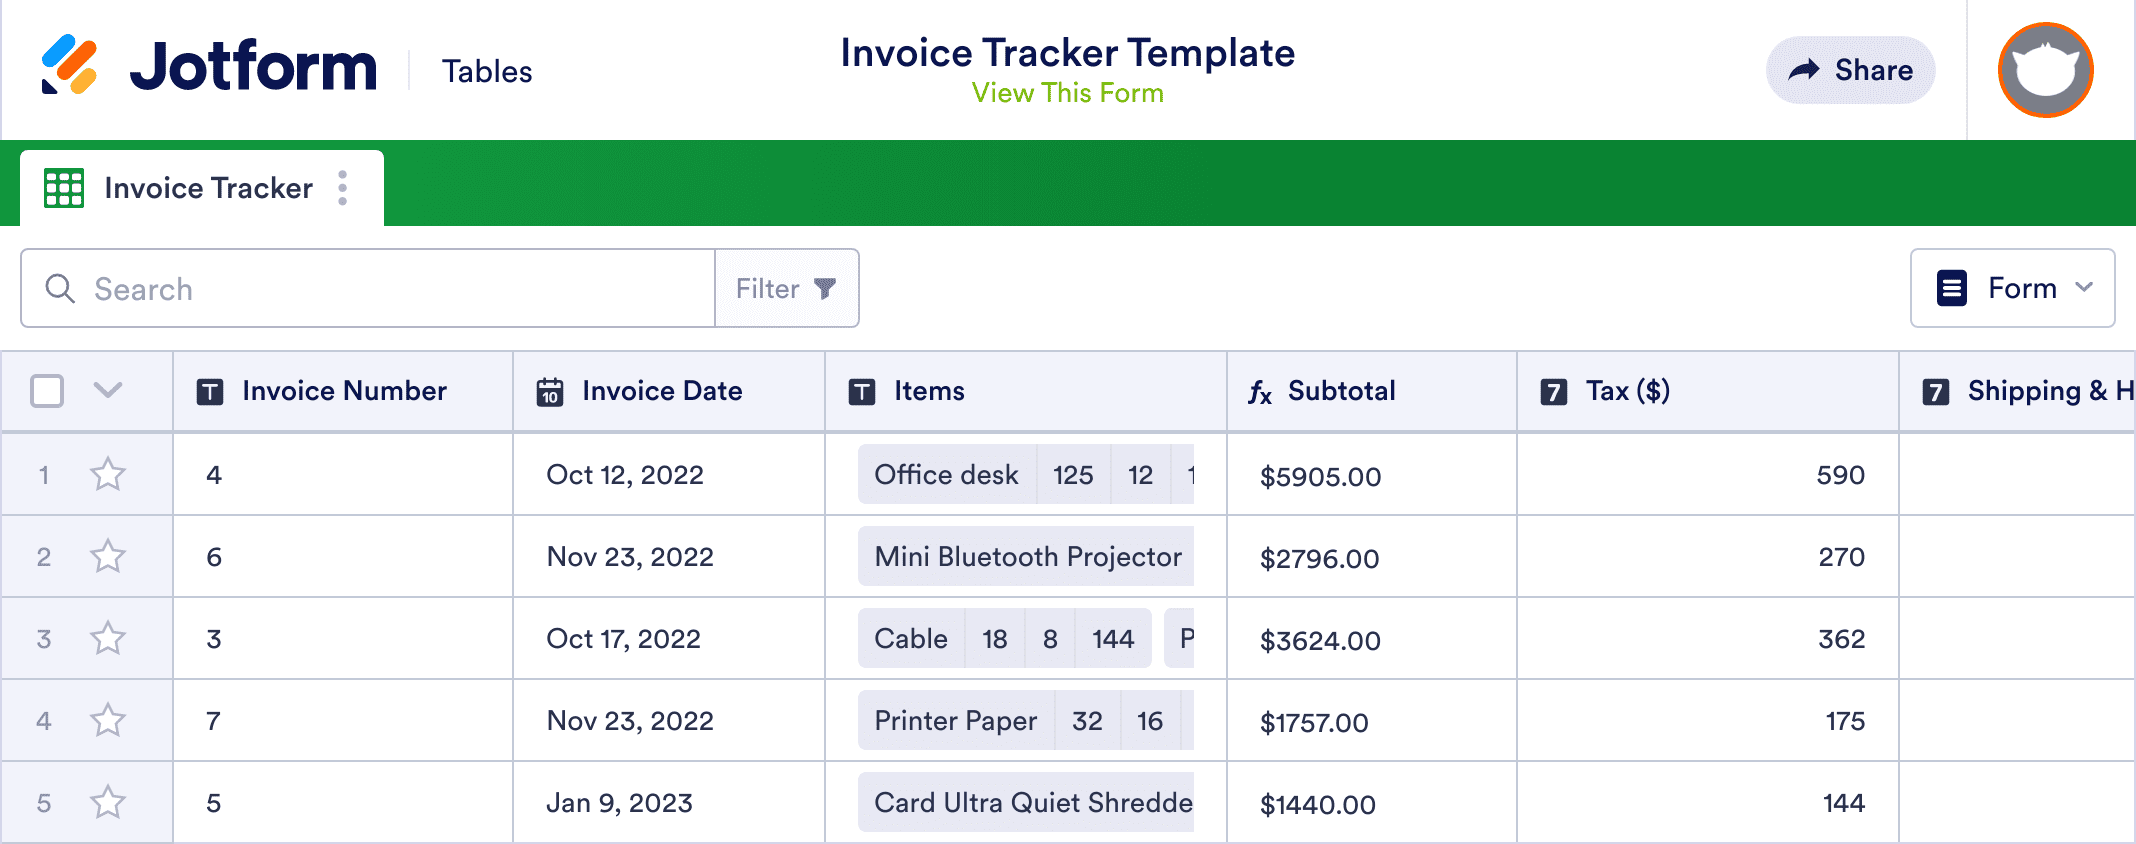 Invoice Tracker Template Jotform Tables